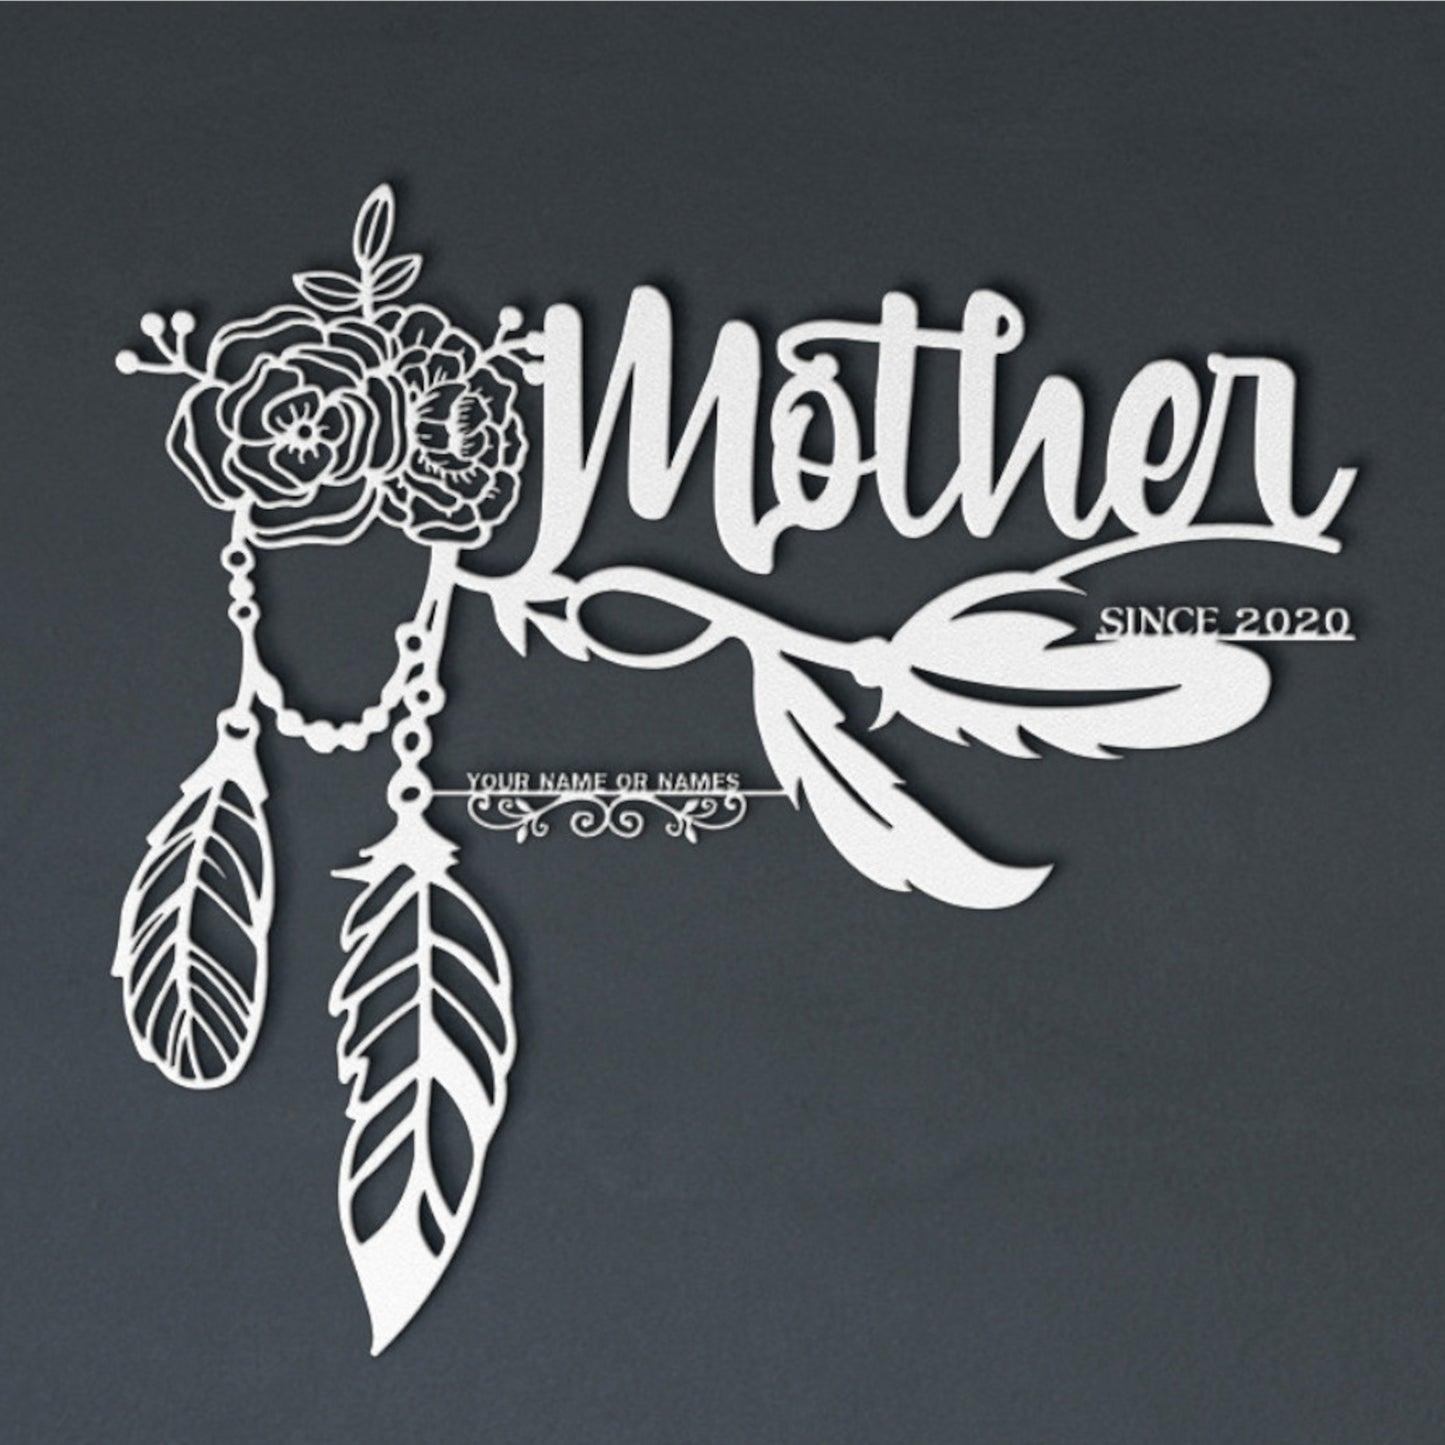 Mothers Day Dreamcatcher Personalized Metal Sign Gift. Family Wall Decoration. Custom Wall Hanging Gift. Wall Art Decor Gift For My Mother